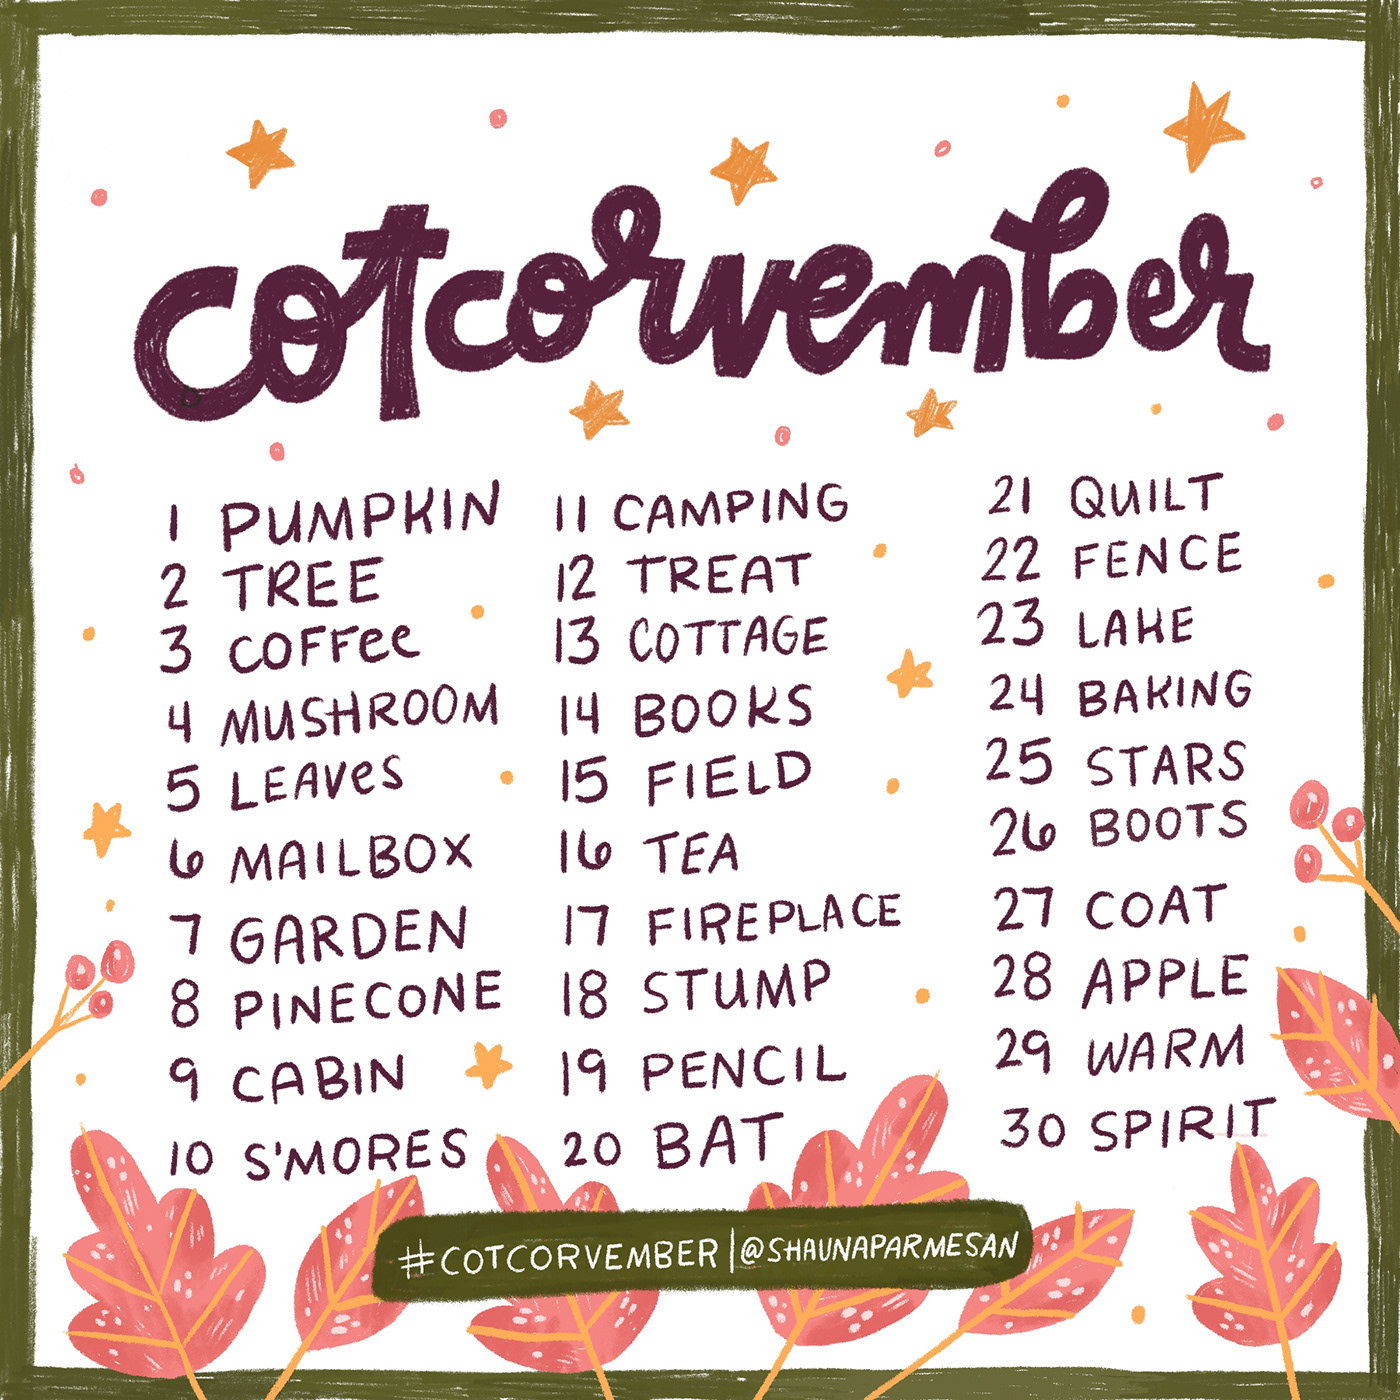 Cotcorvember November Drawing Prompts on Behance